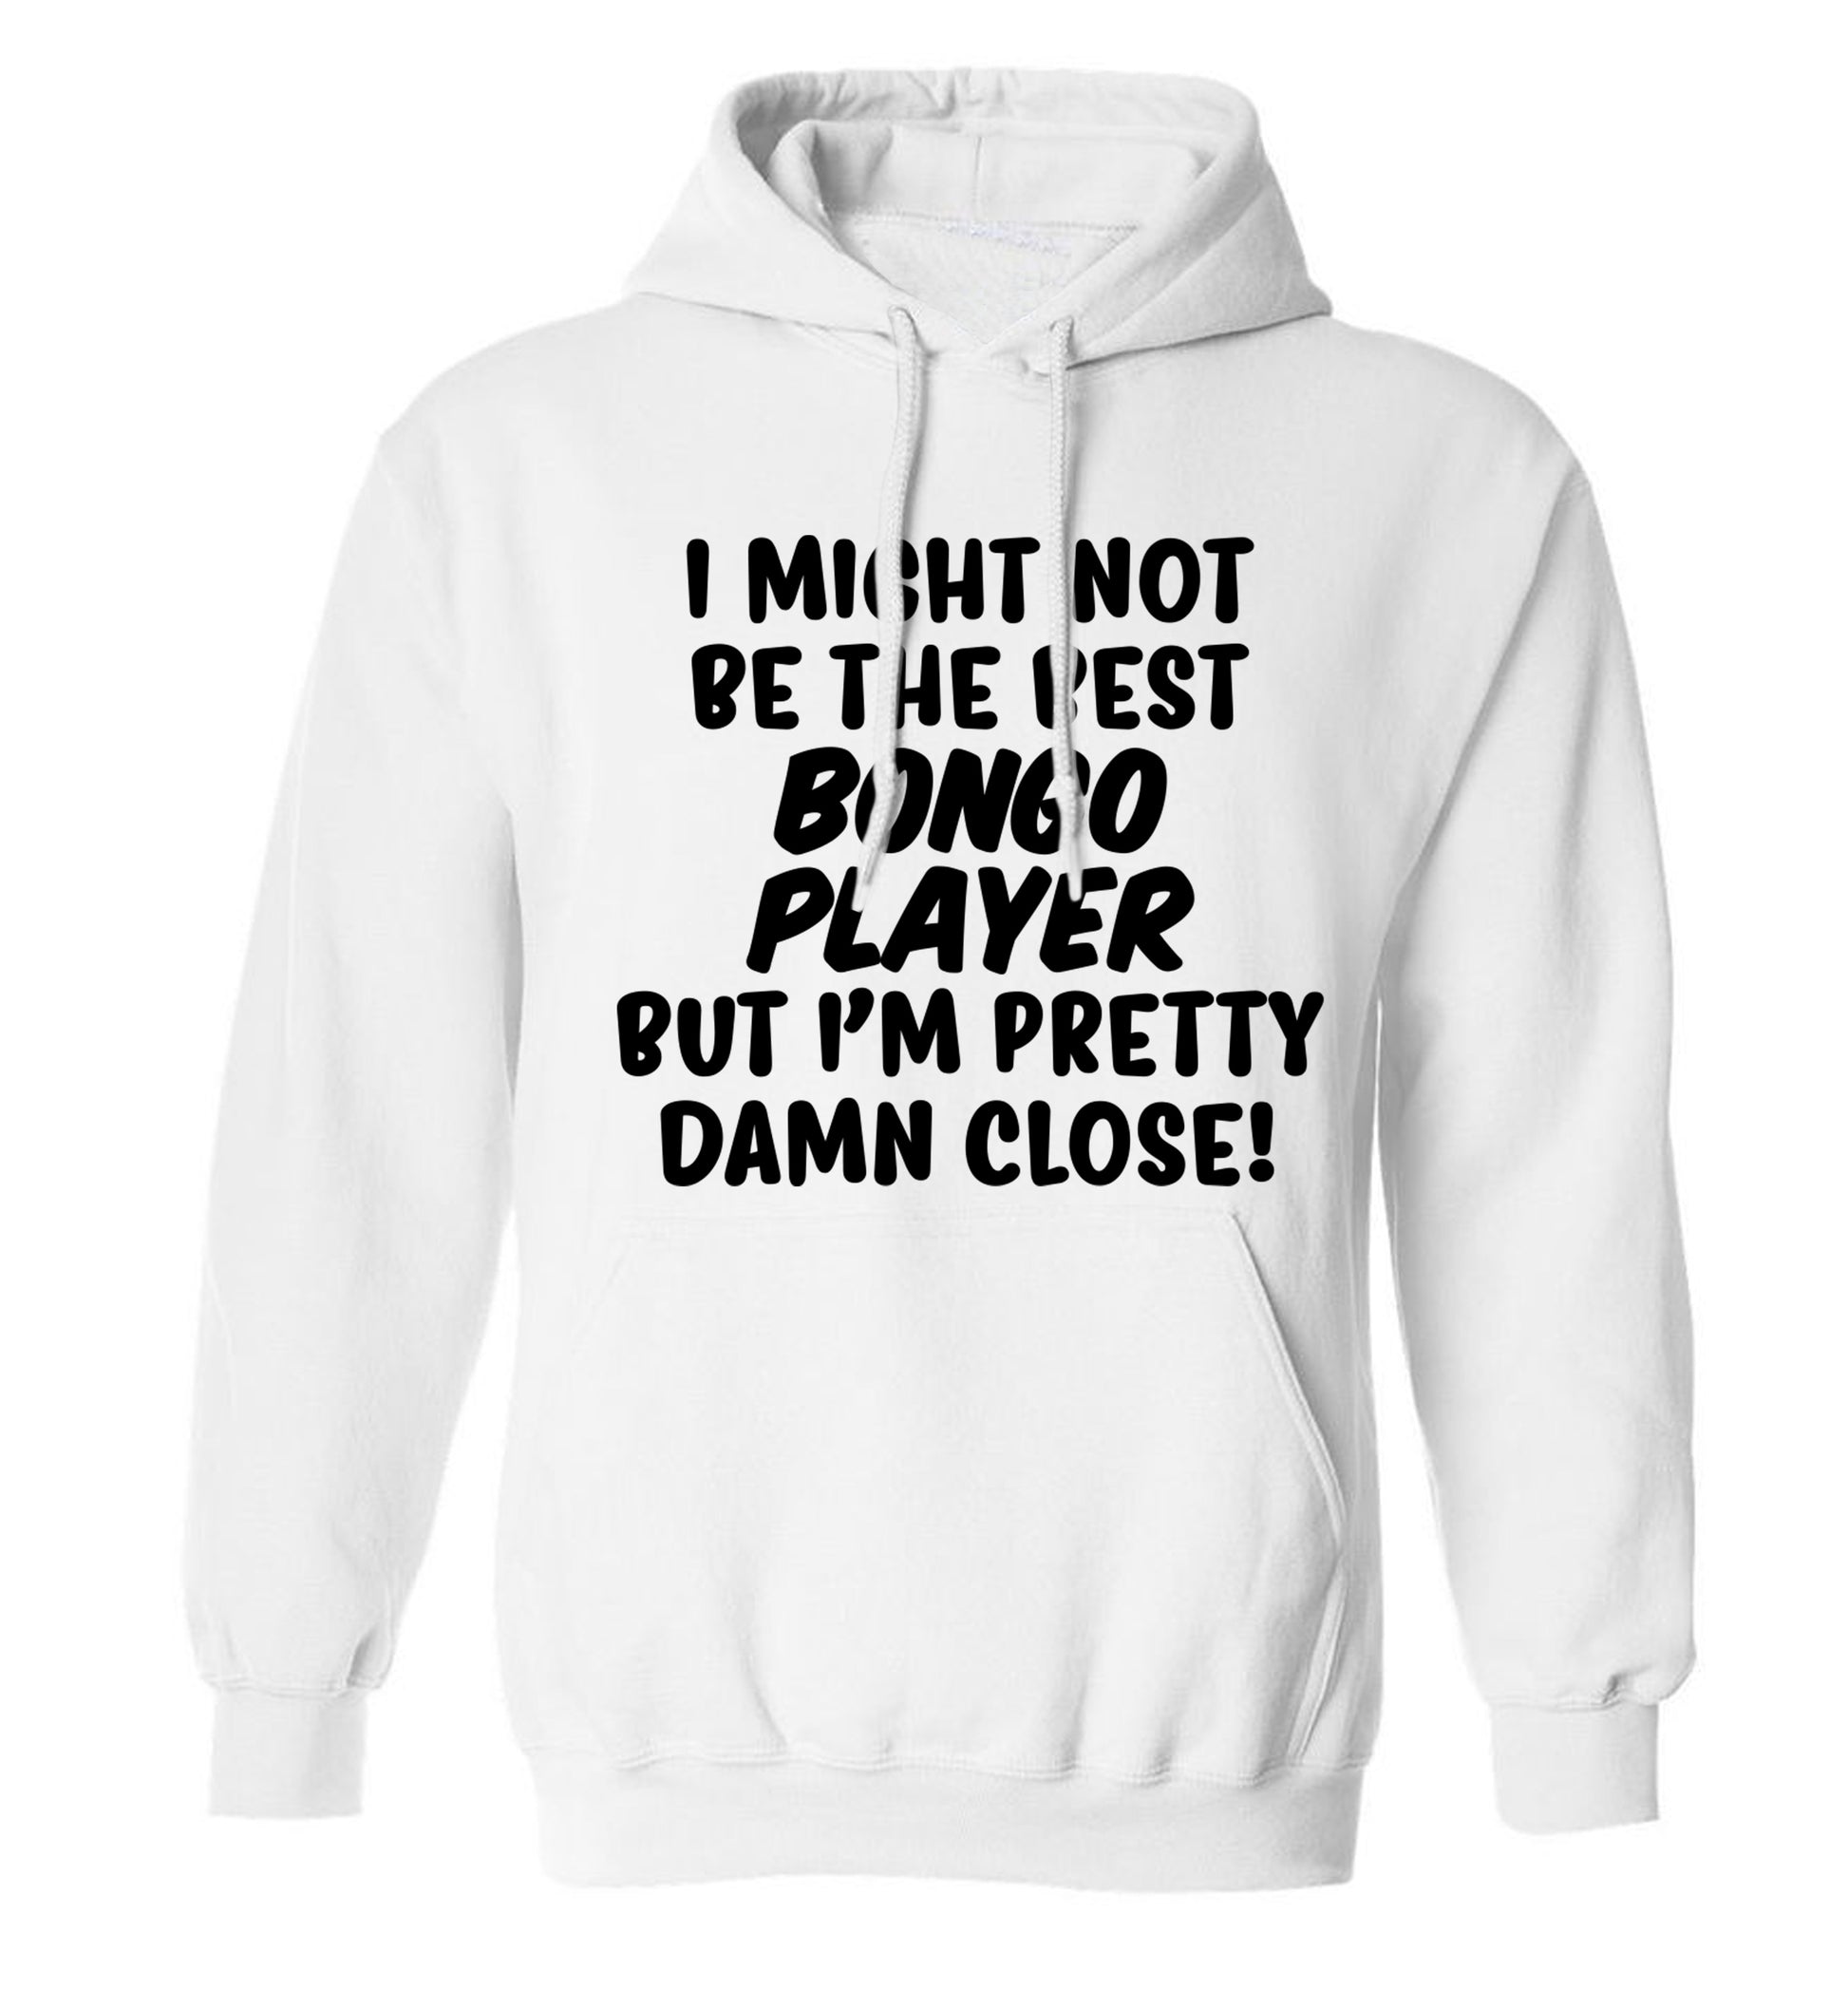 I might not be the best bongo player but I'm pretty close! adults unisexwhite hoodie 2XL